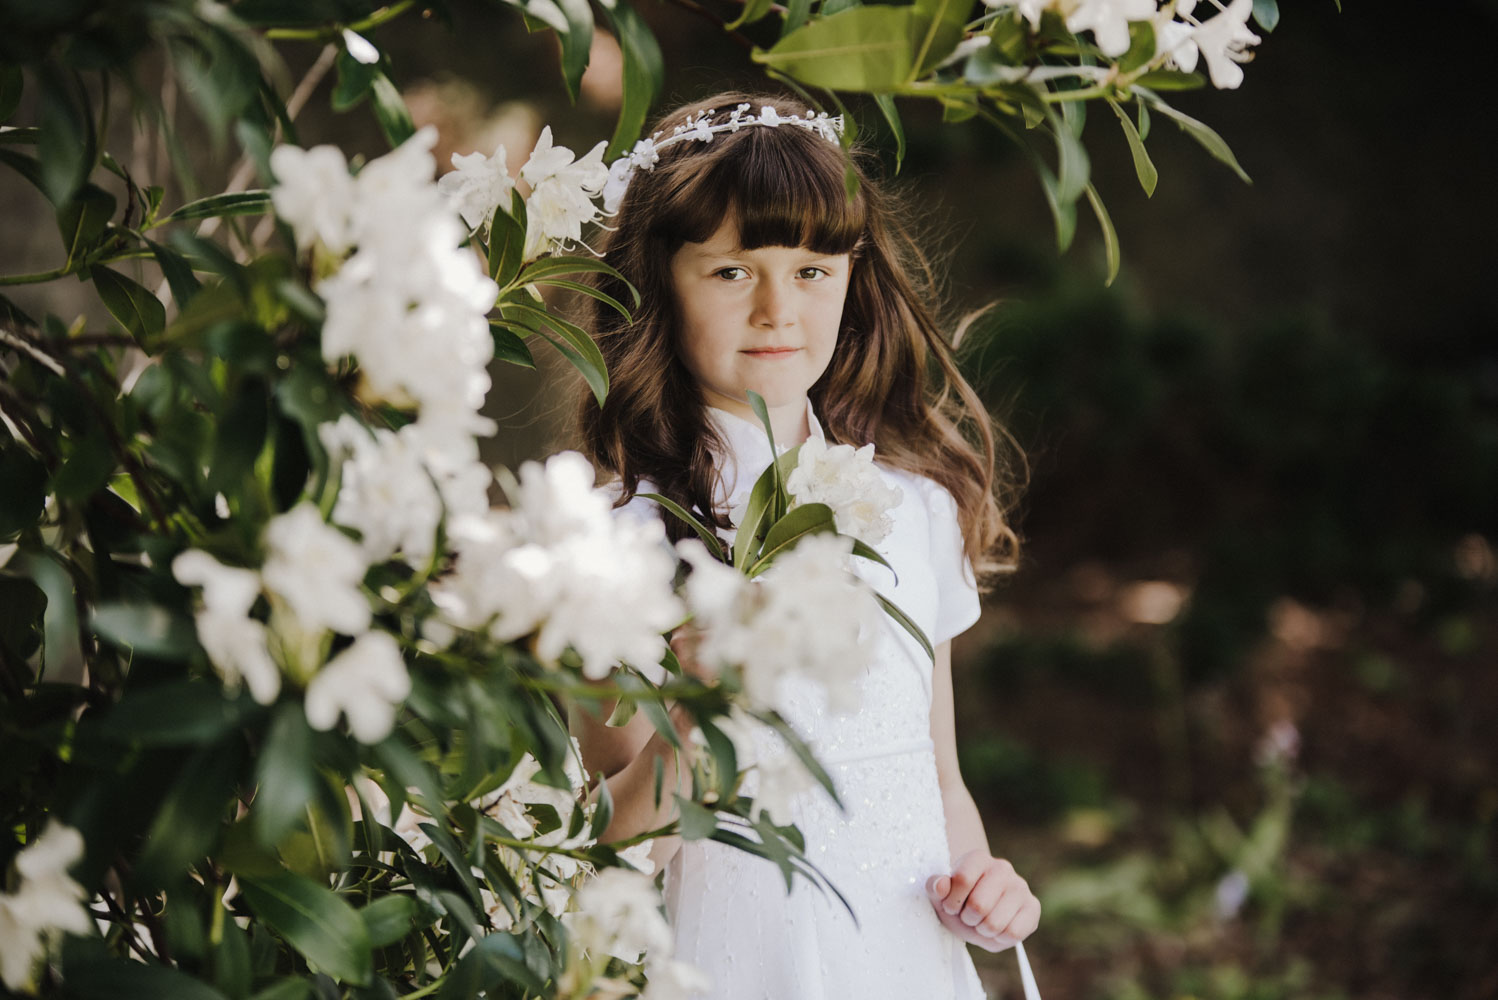 Ada and her Communion Day